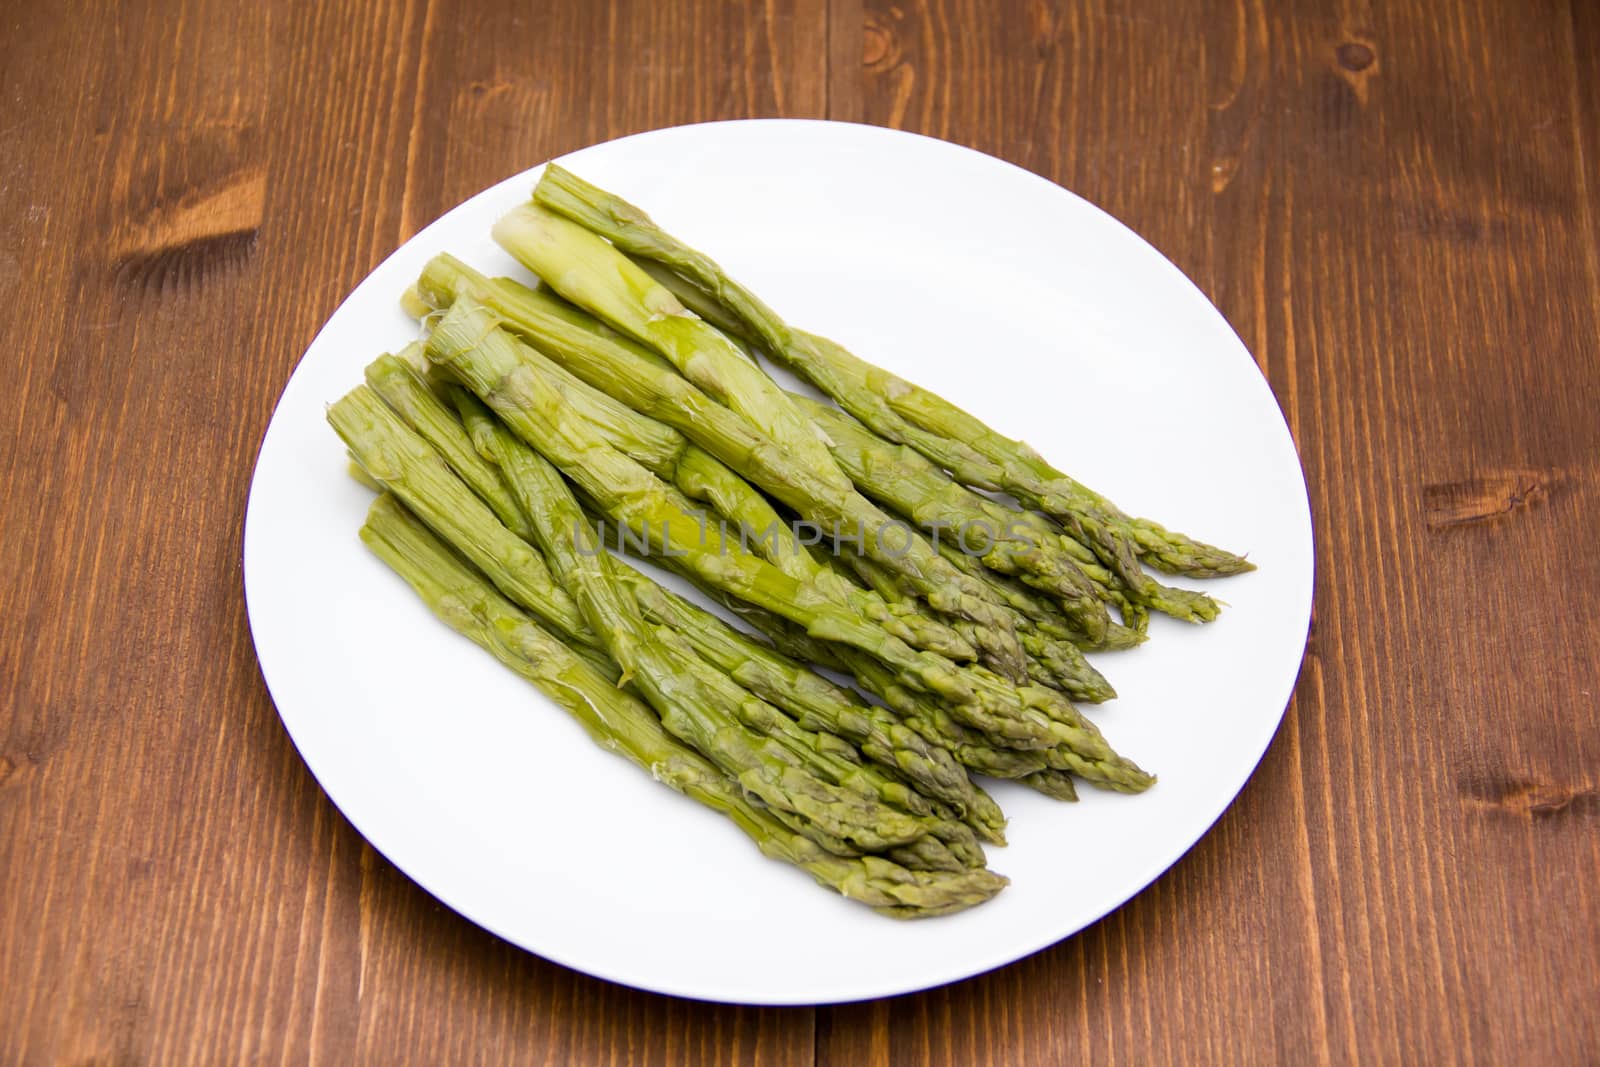 Asparagus on wood by spafra